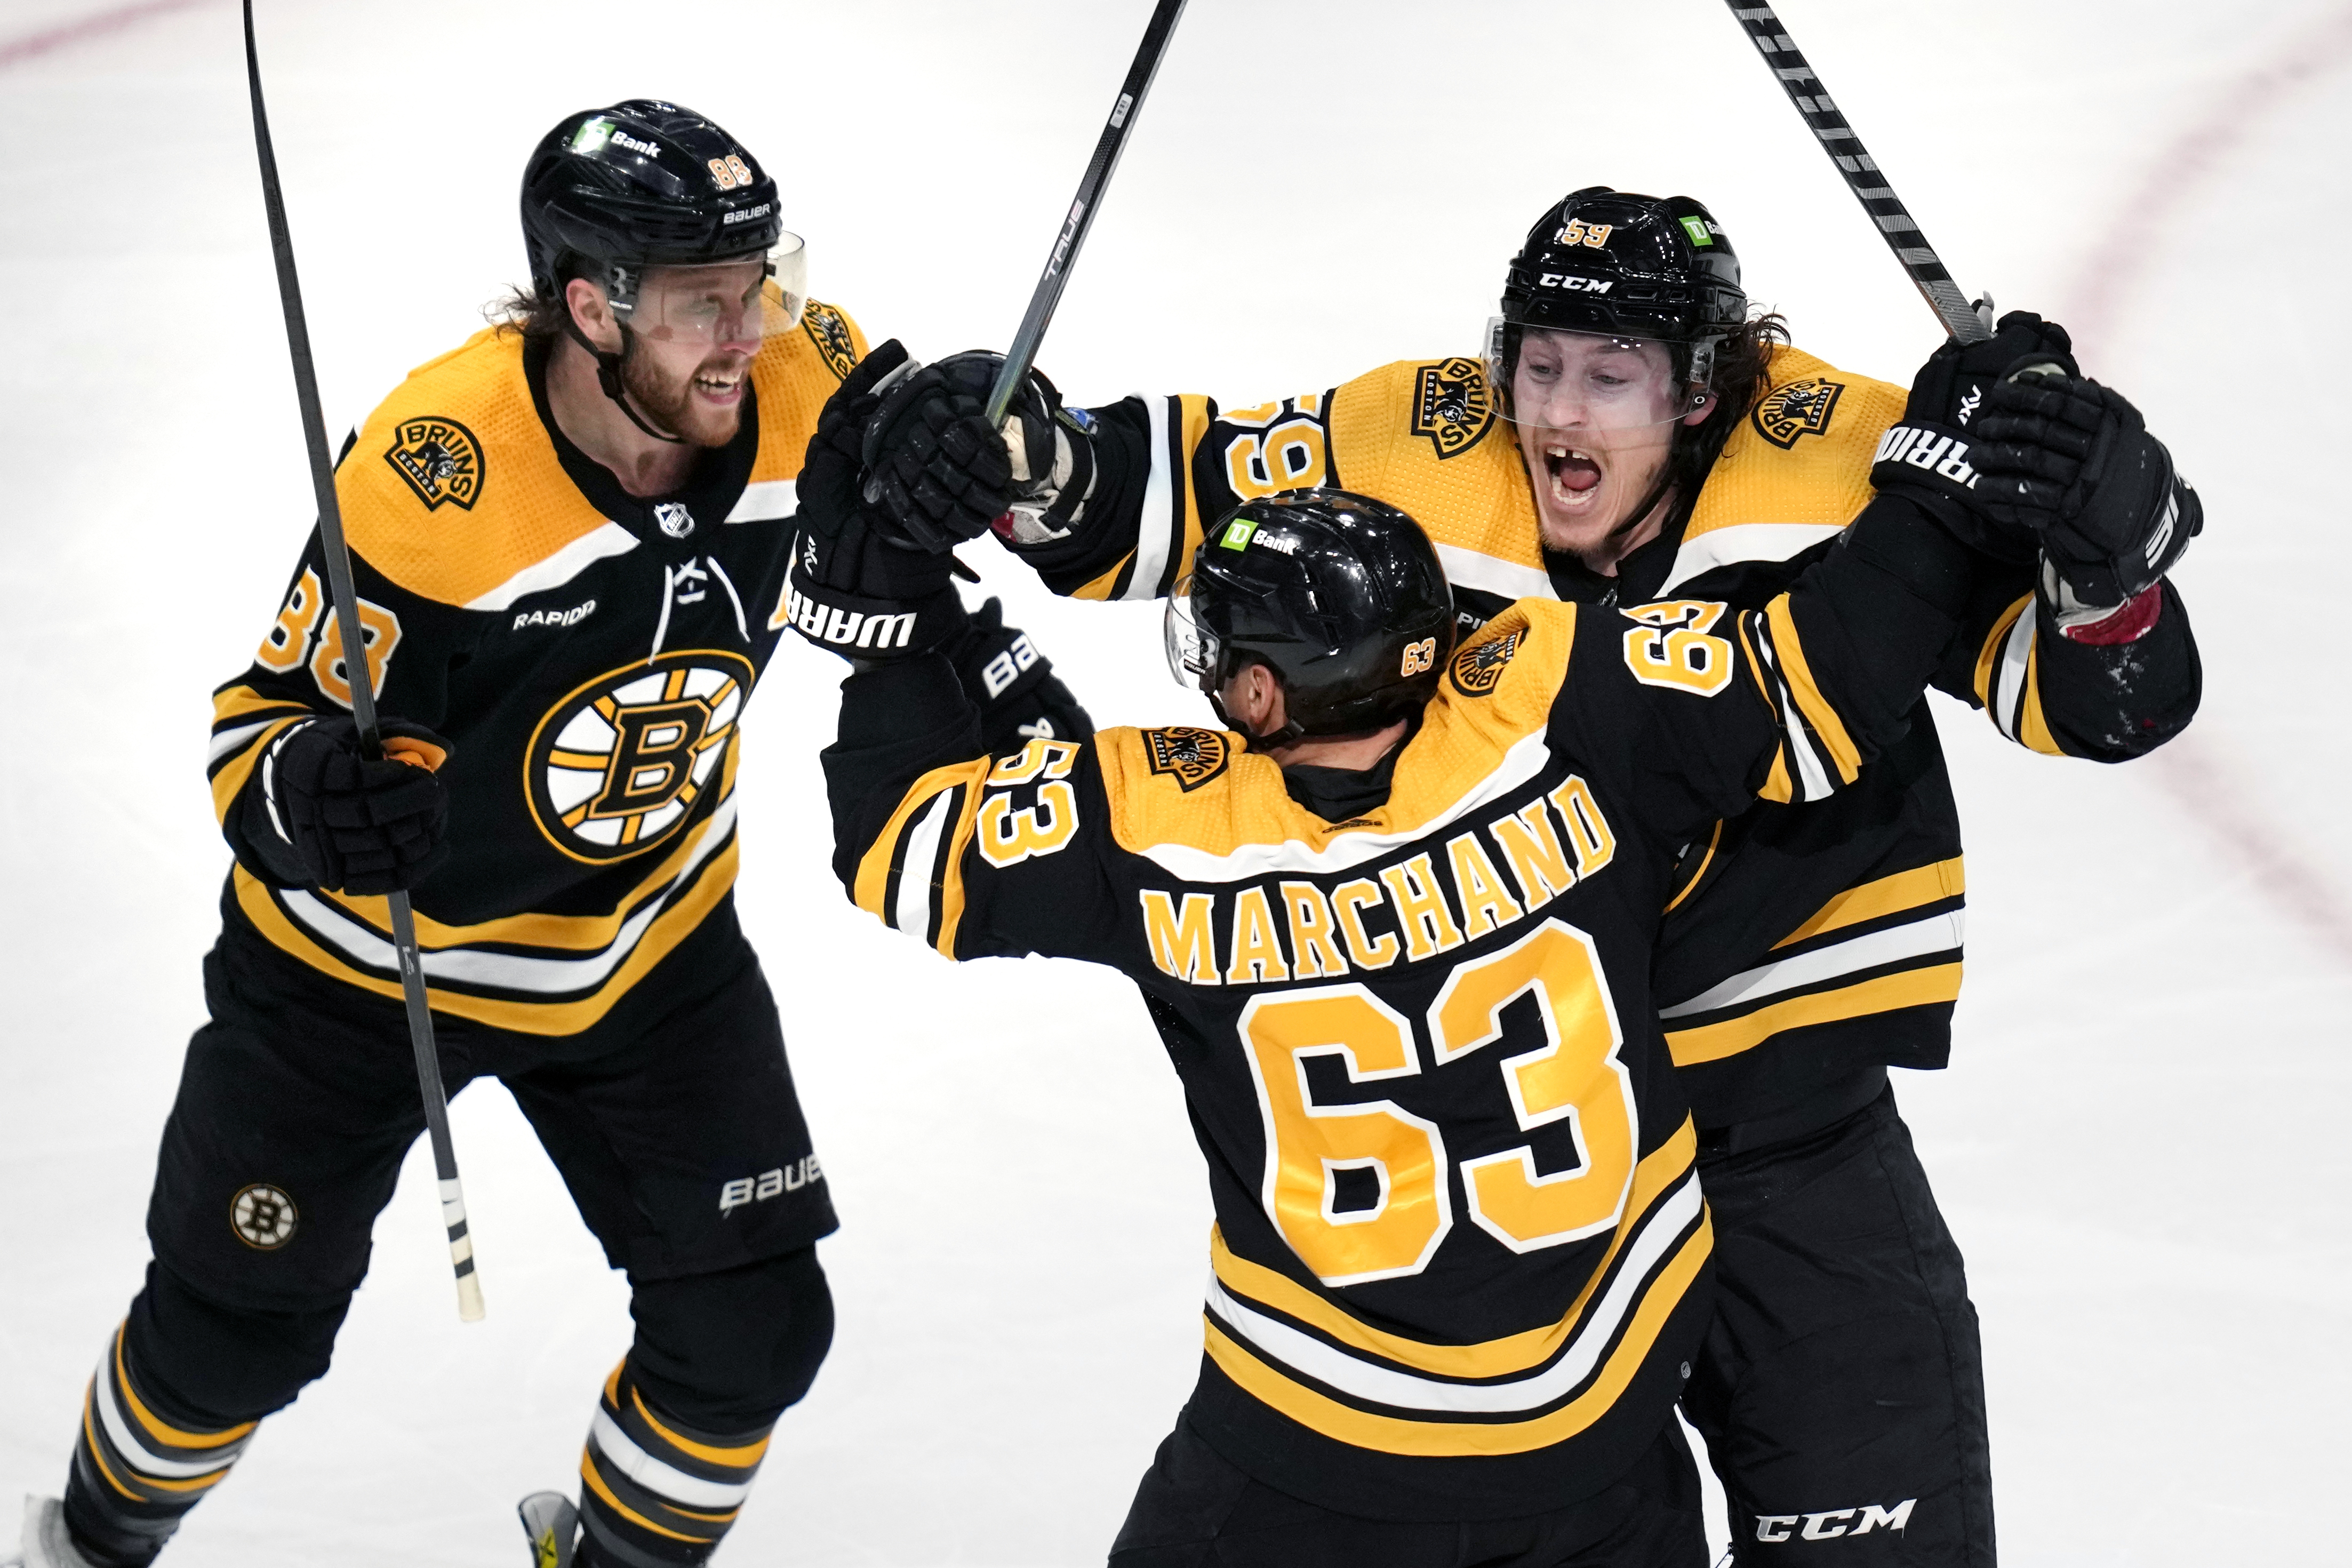 Bruins vs. Panthers Game 7 tickets: Look how expensive tickets are